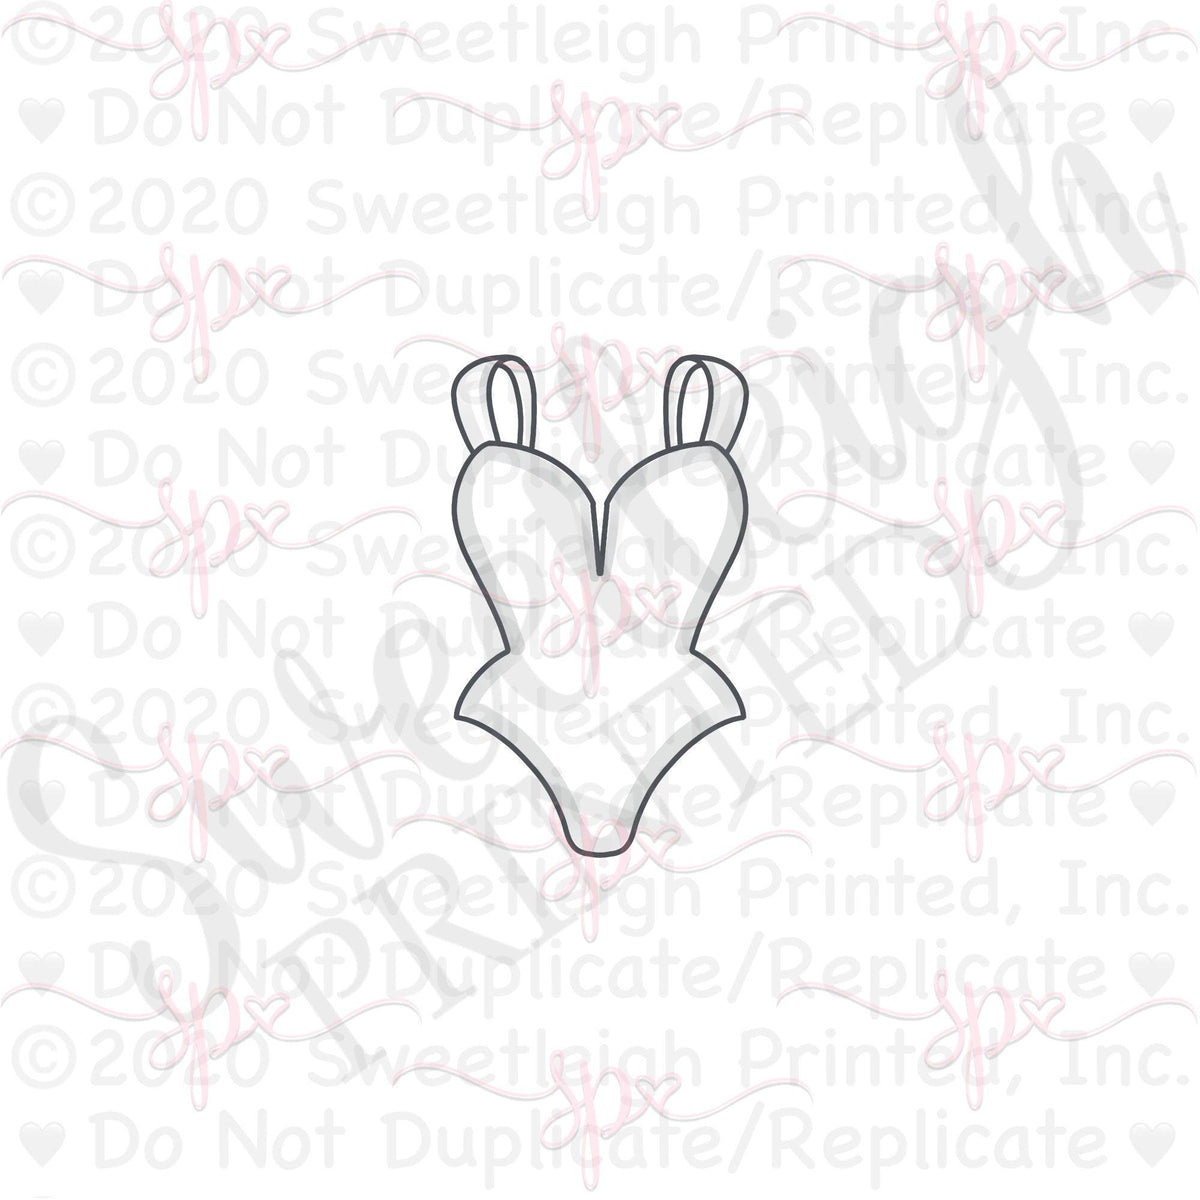 Deep V Bathing Suit Cookie Cutter - Sweetleigh 